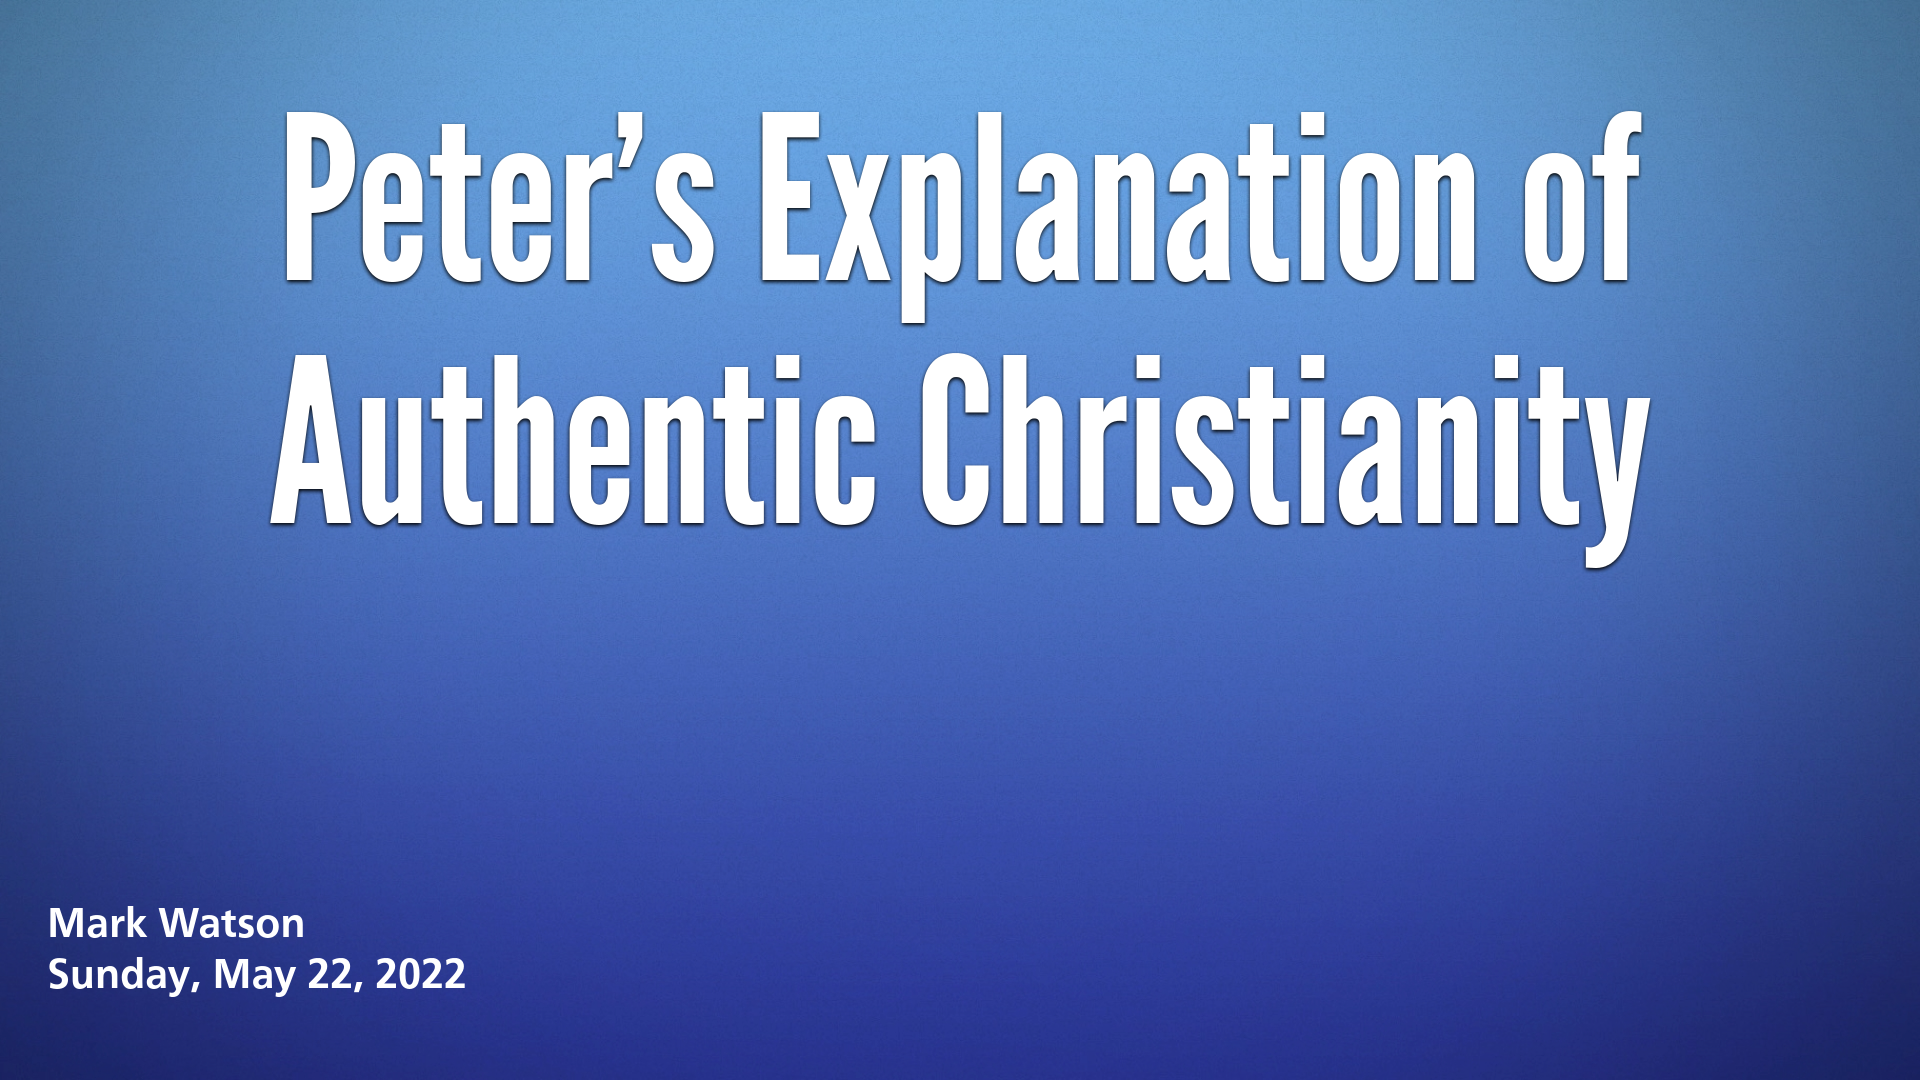 "Peter's Explanation of Authentic Christianity"